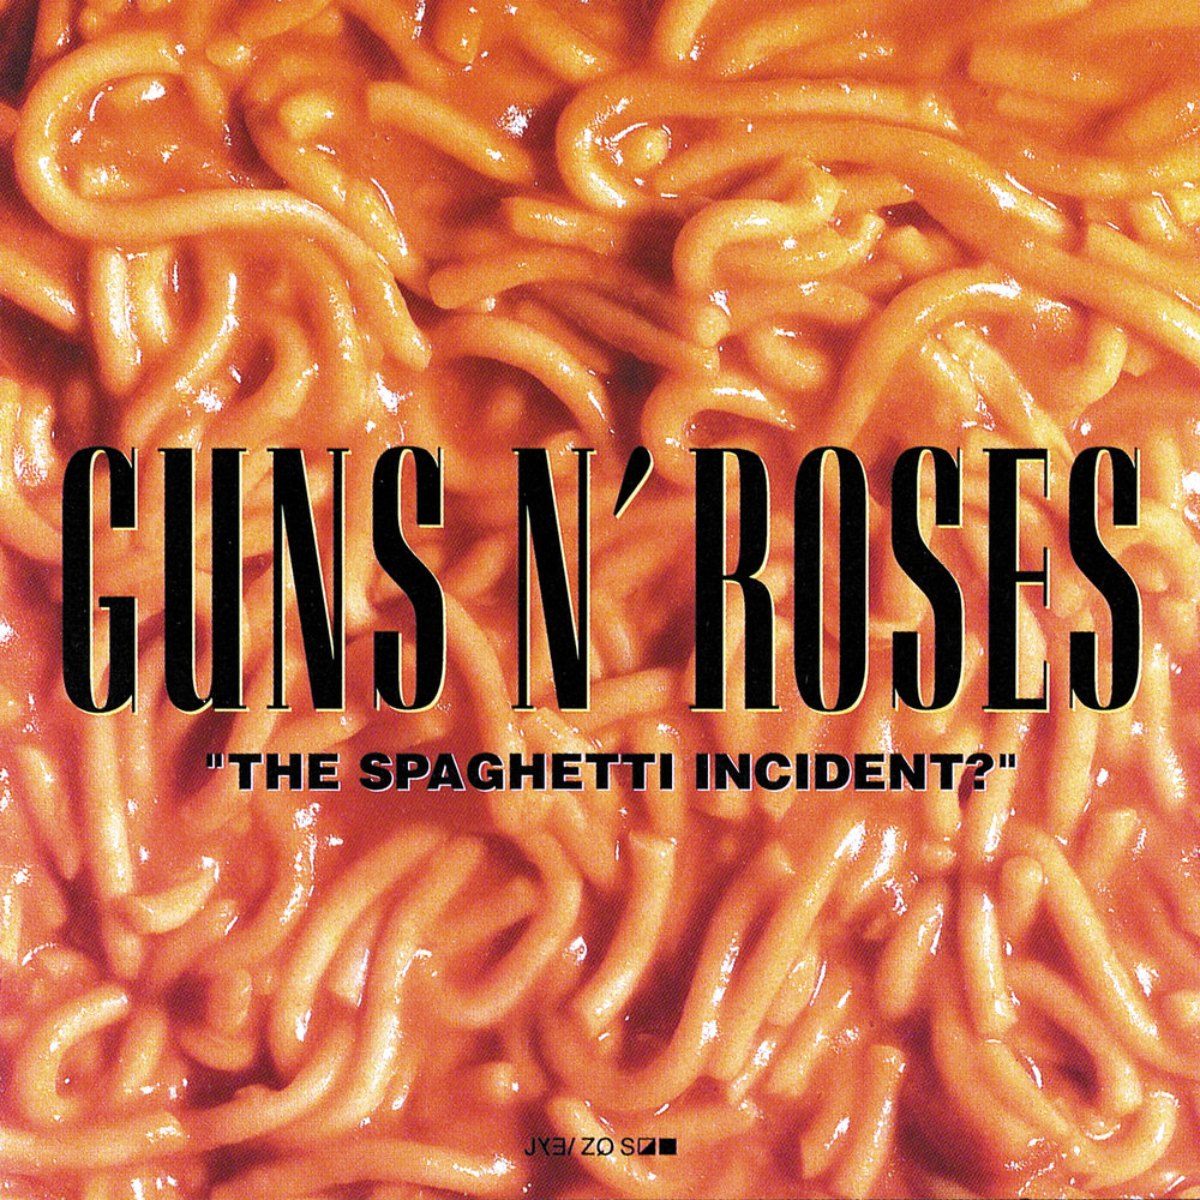 The Spaghetti Incident?" album cover by Guns N' Roses